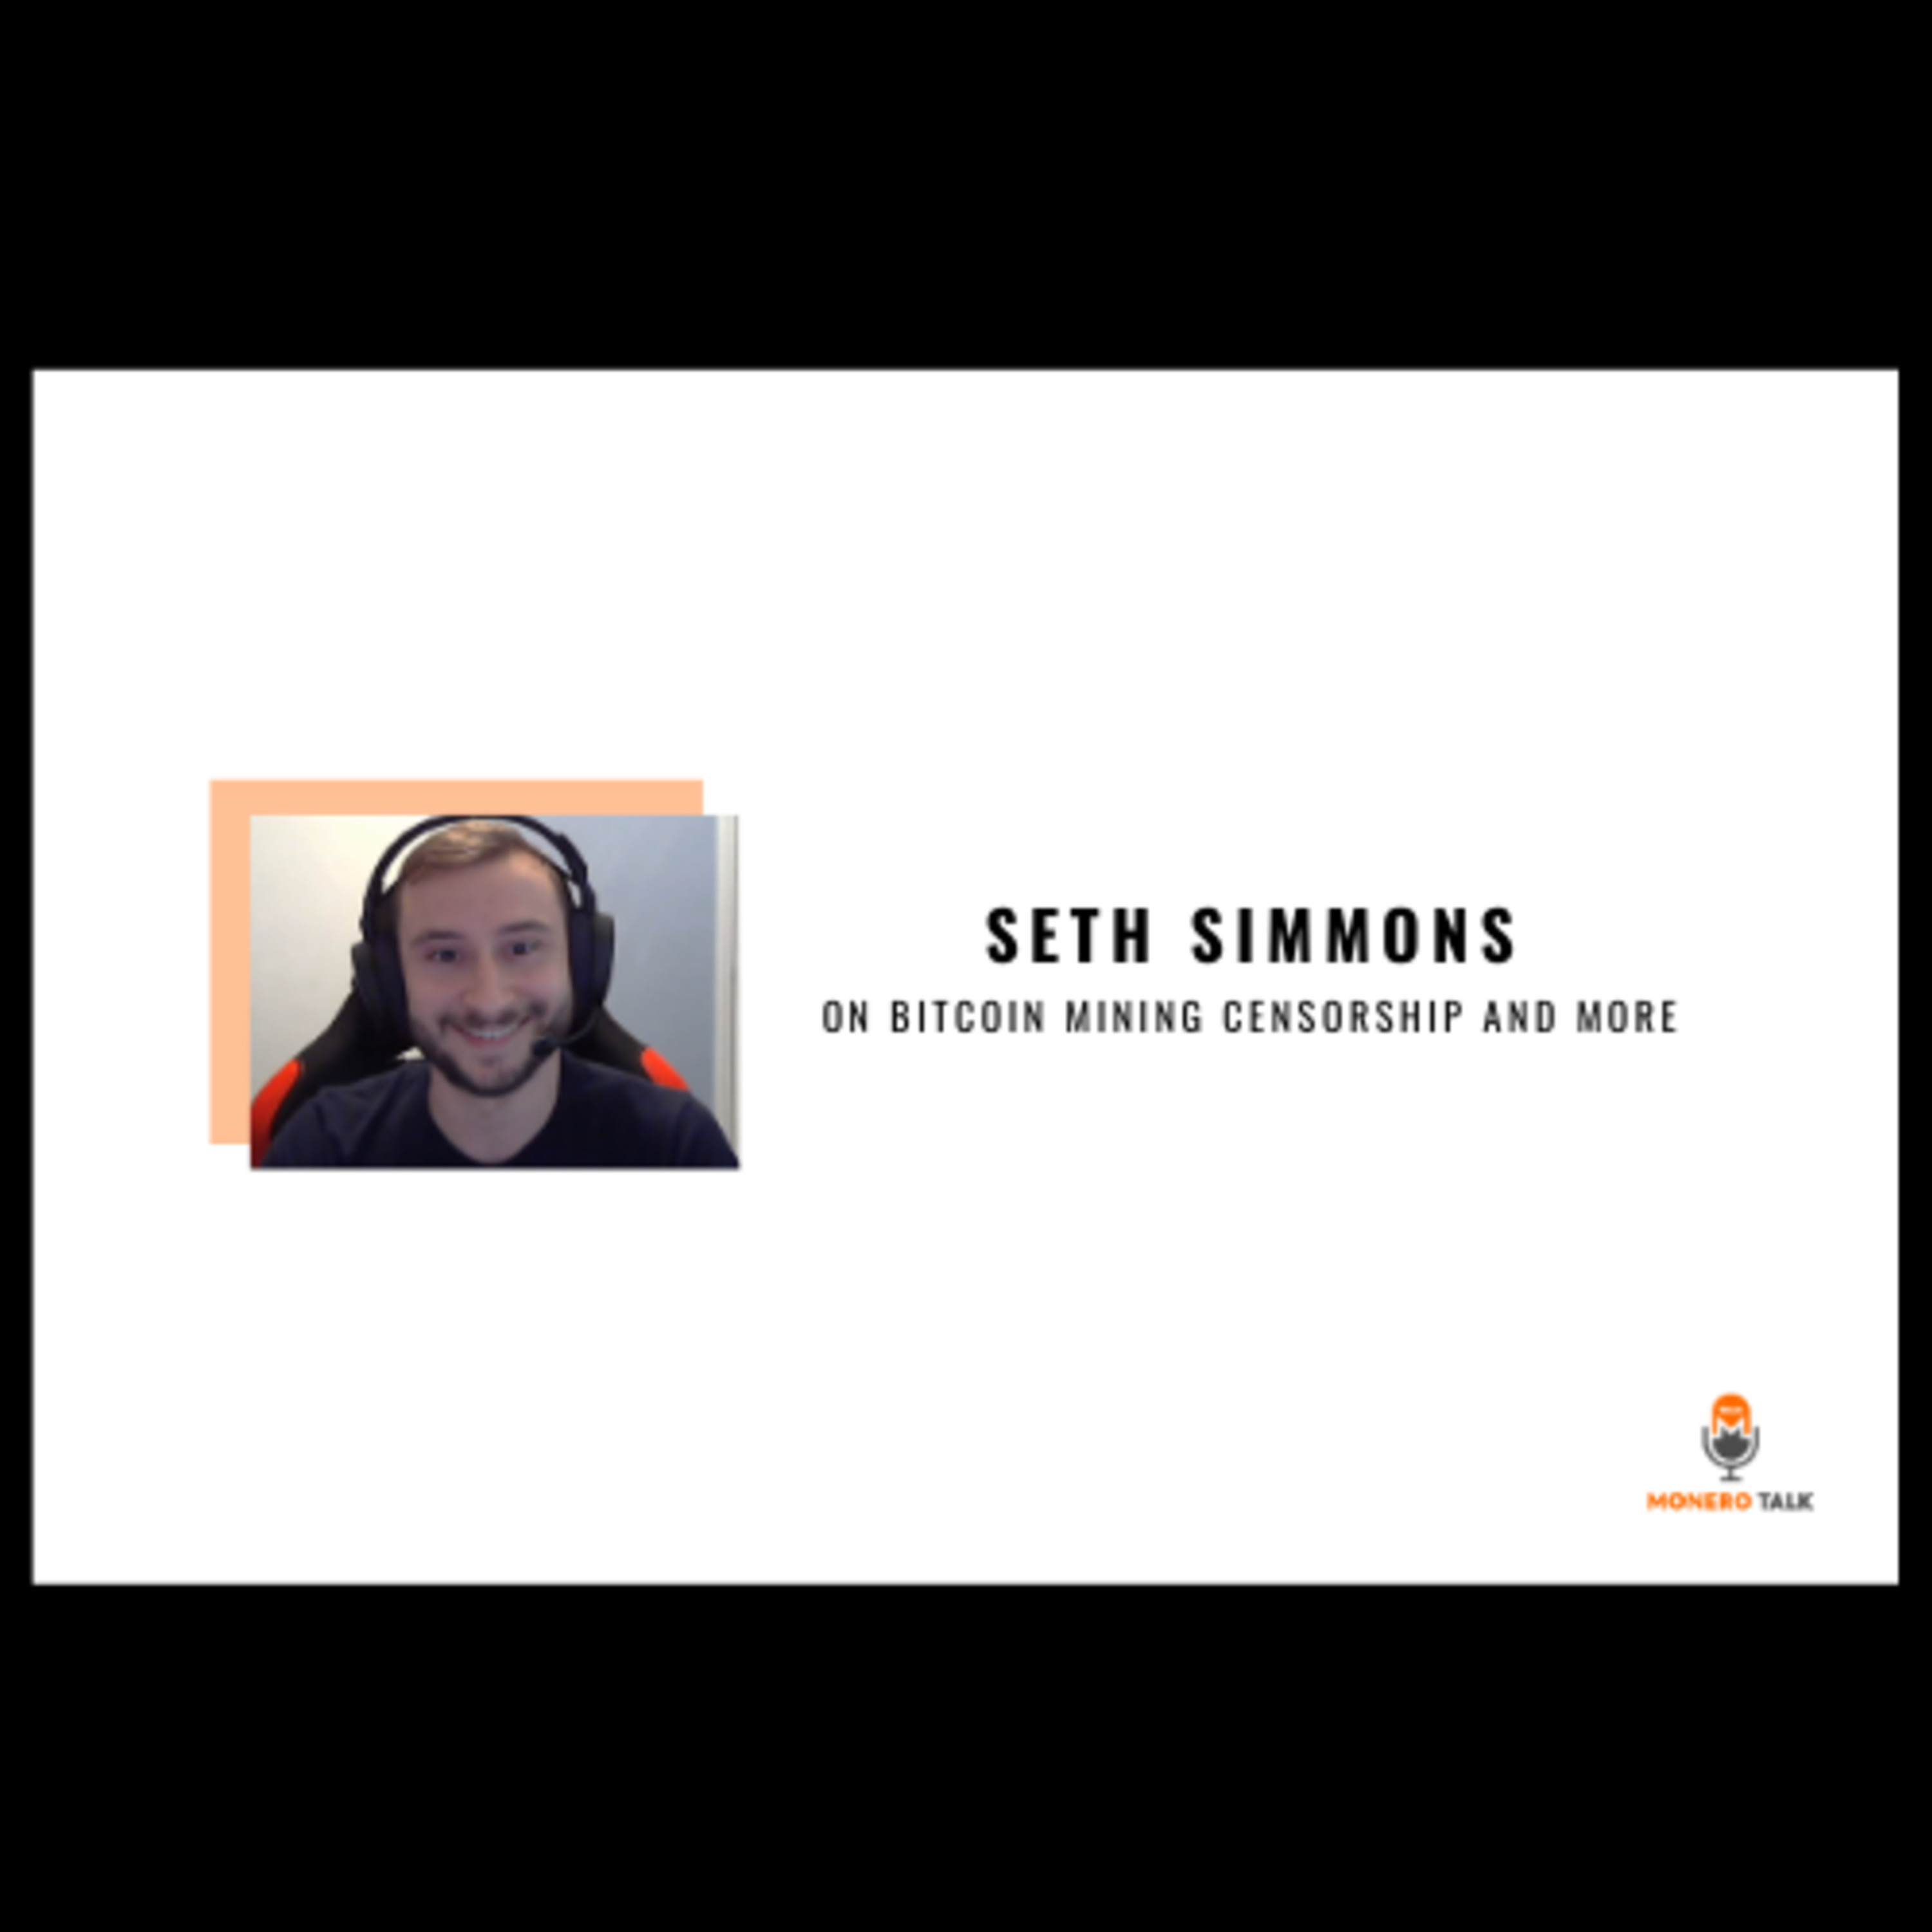 Seth Simmons on Bitcoin Mining Censorship and More